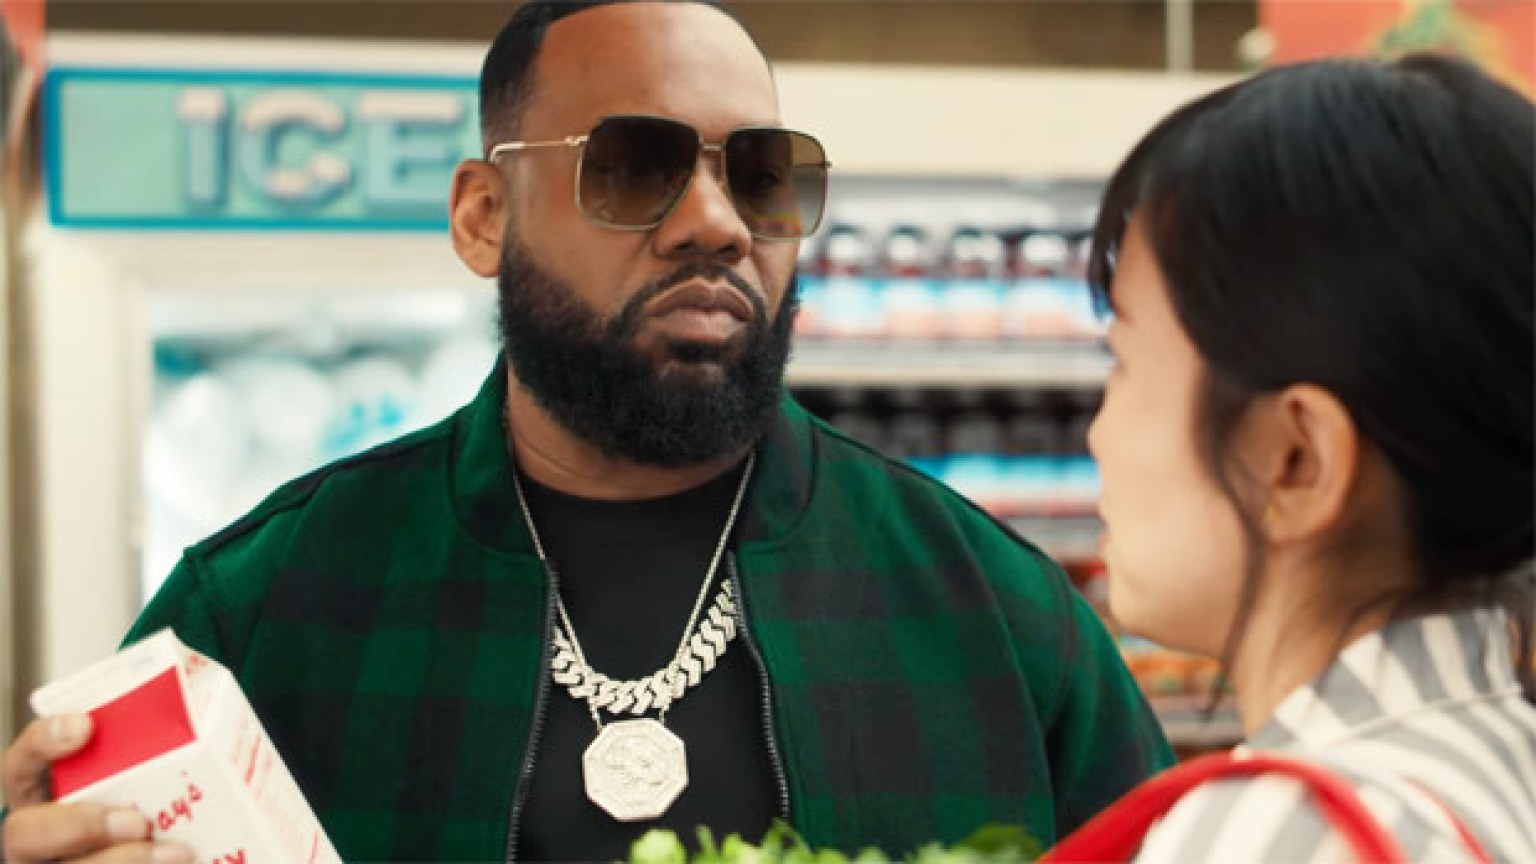 DoorDash’s Super Bowl Commercial Has Raekwon, Tiny Chef & Groceries